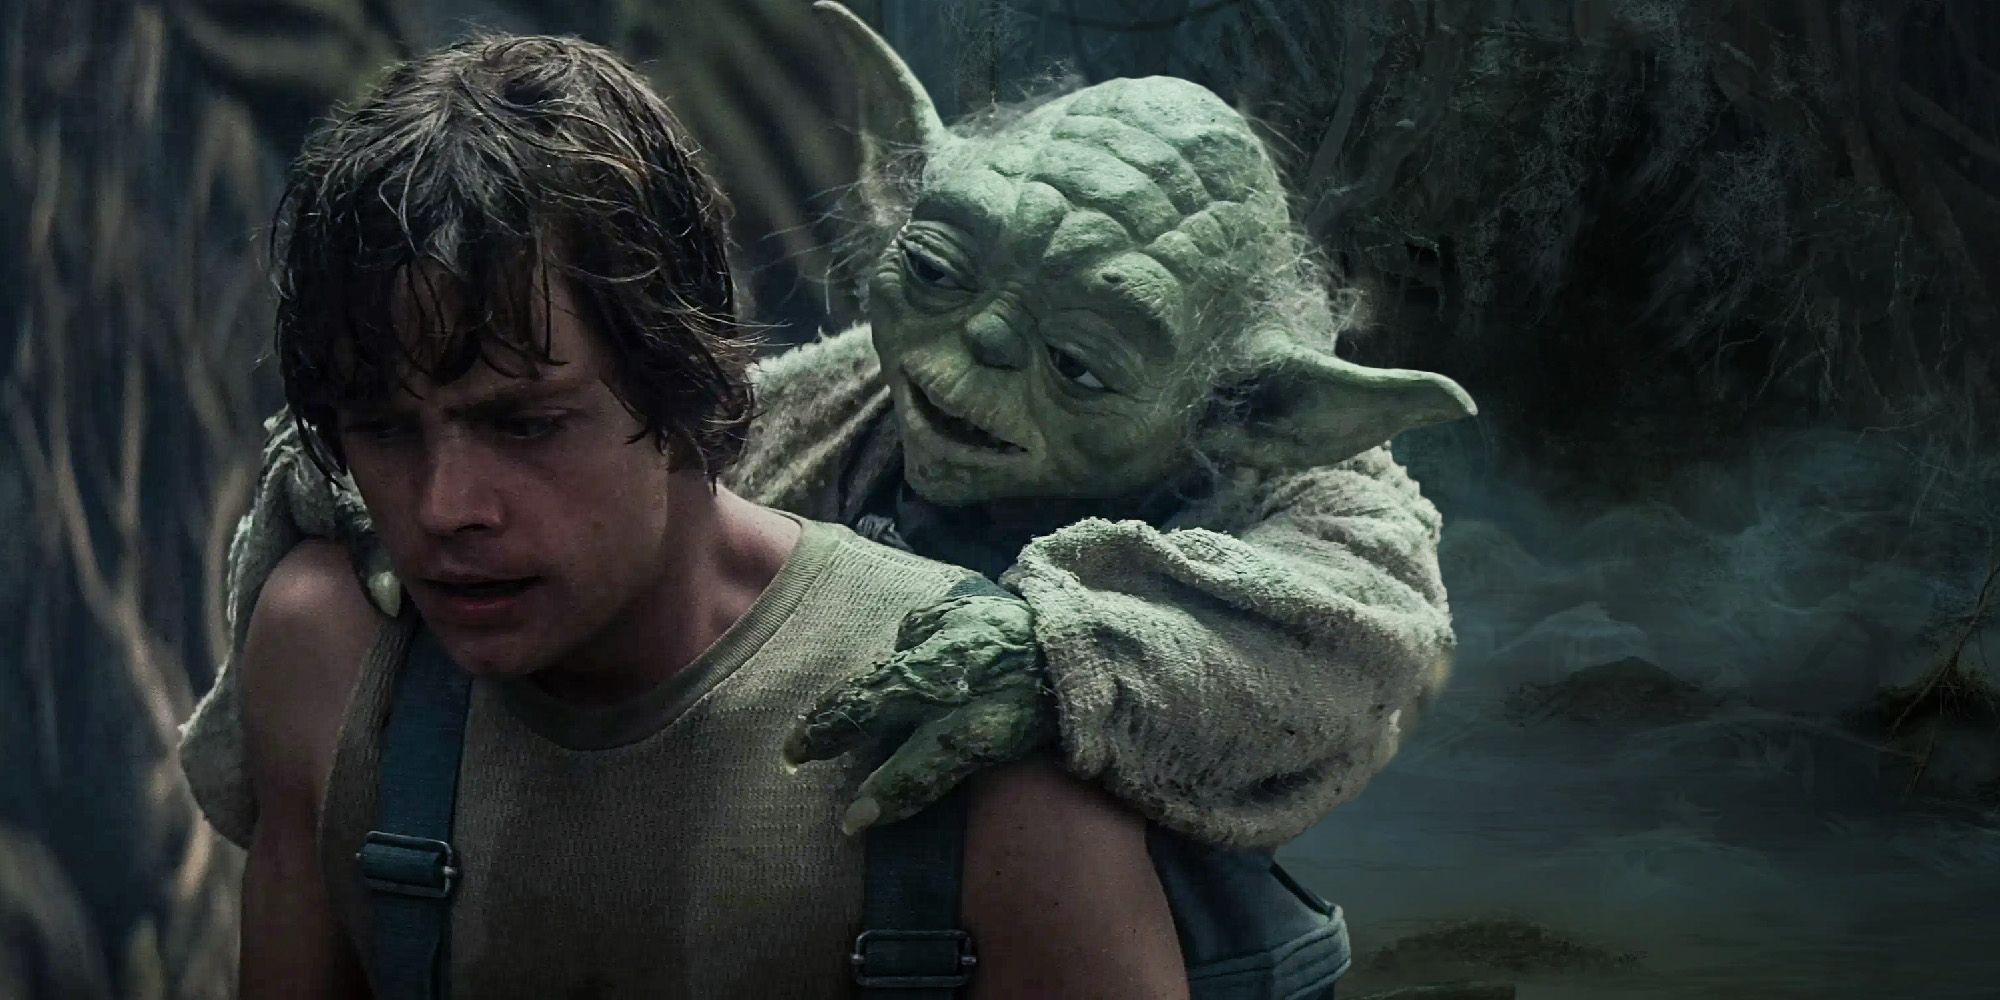 Luke carries Yoda while training in Dogobah in The Empire Strikes Back